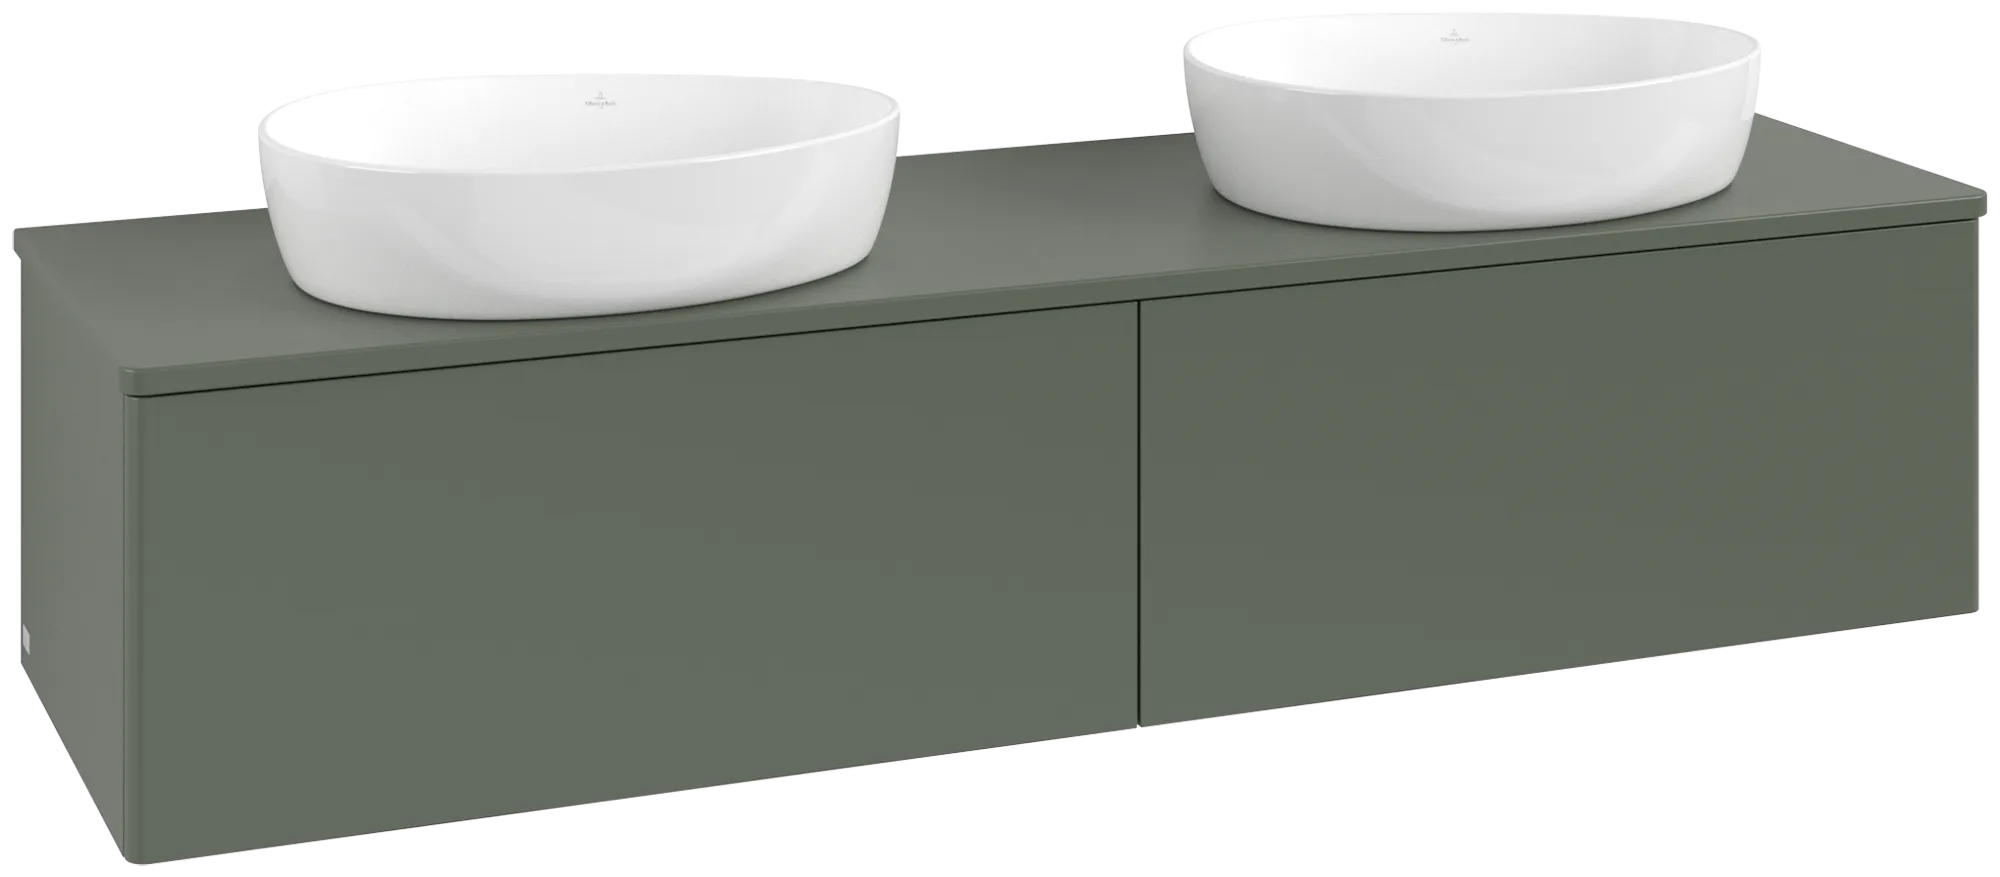 Picture of VILLEROY BOCH Antao Vanity unit, 2 pull-out compartments, 1600 x 360 x 500 mm, Front without structure, Leaf Green Matt Lacquer / Leaf Green Matt Lacquer #K39050HL